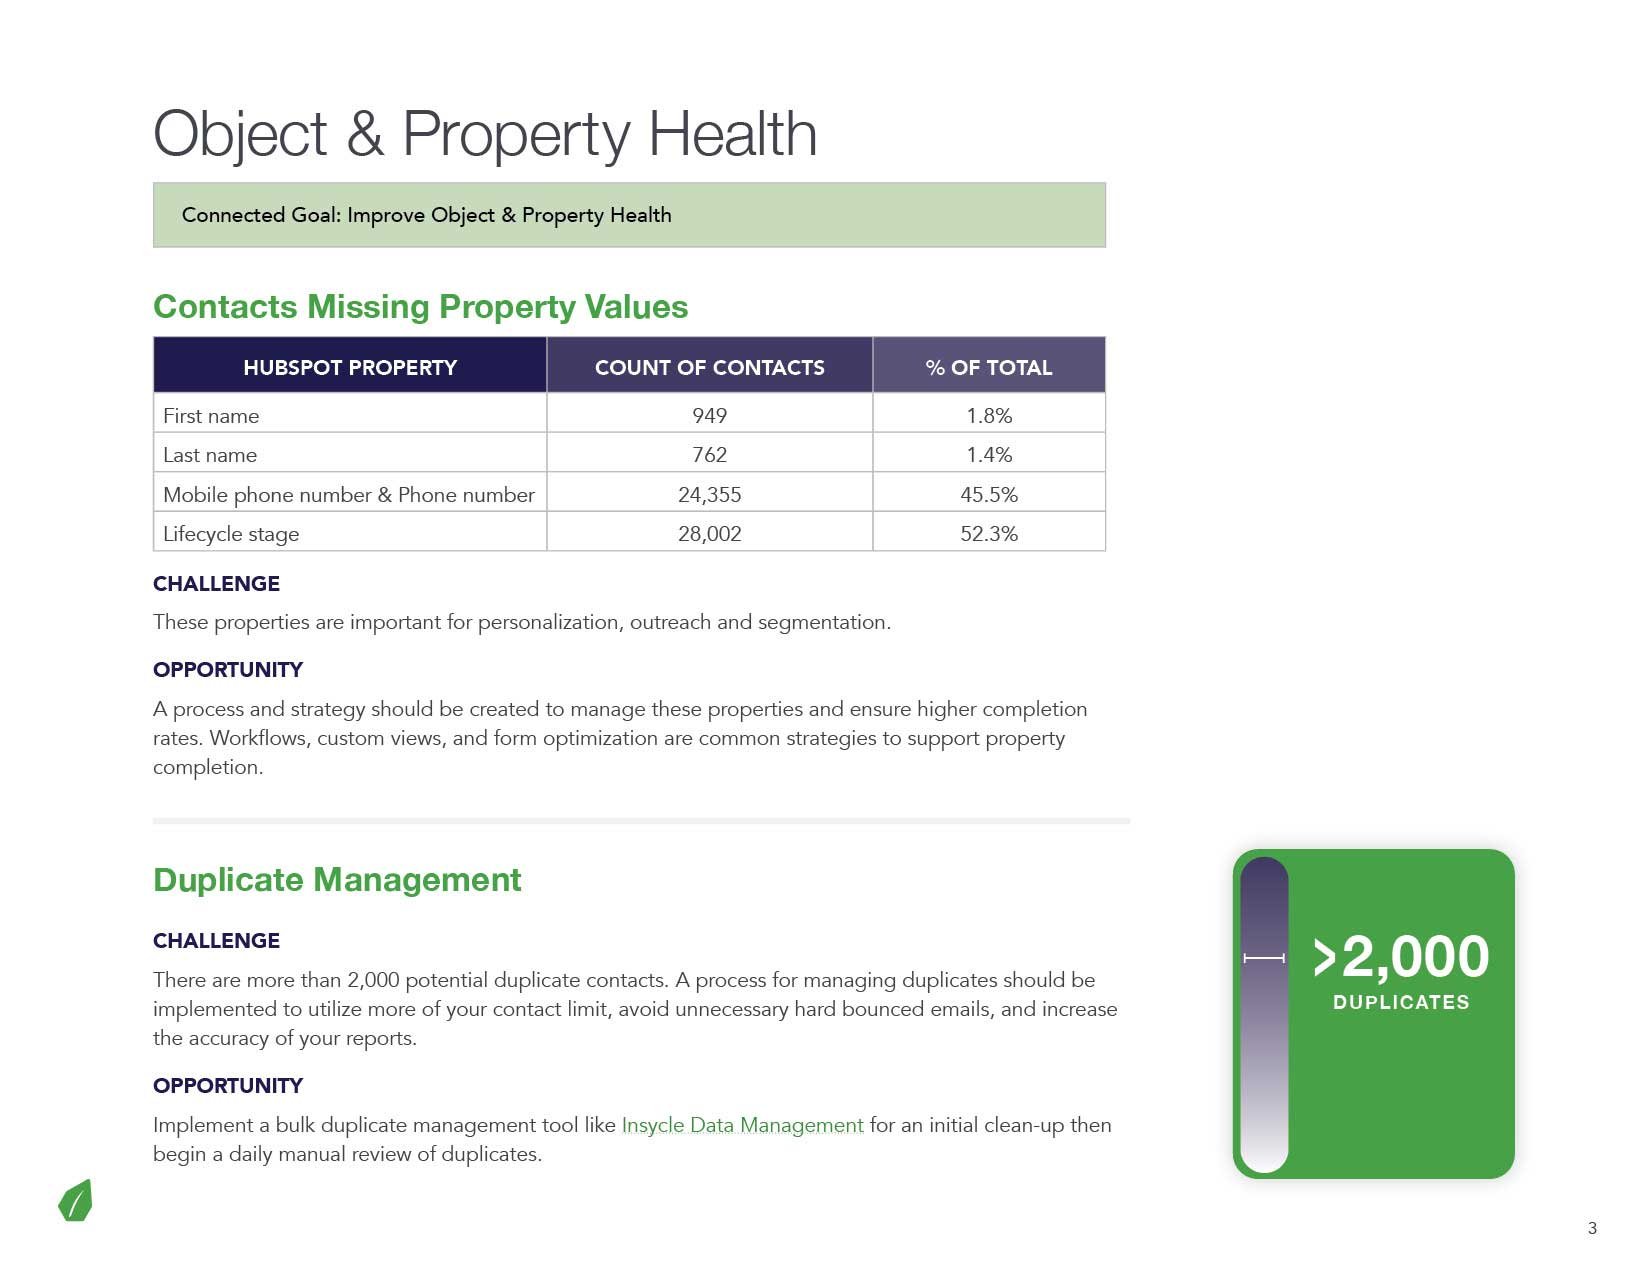 Object and Property Health